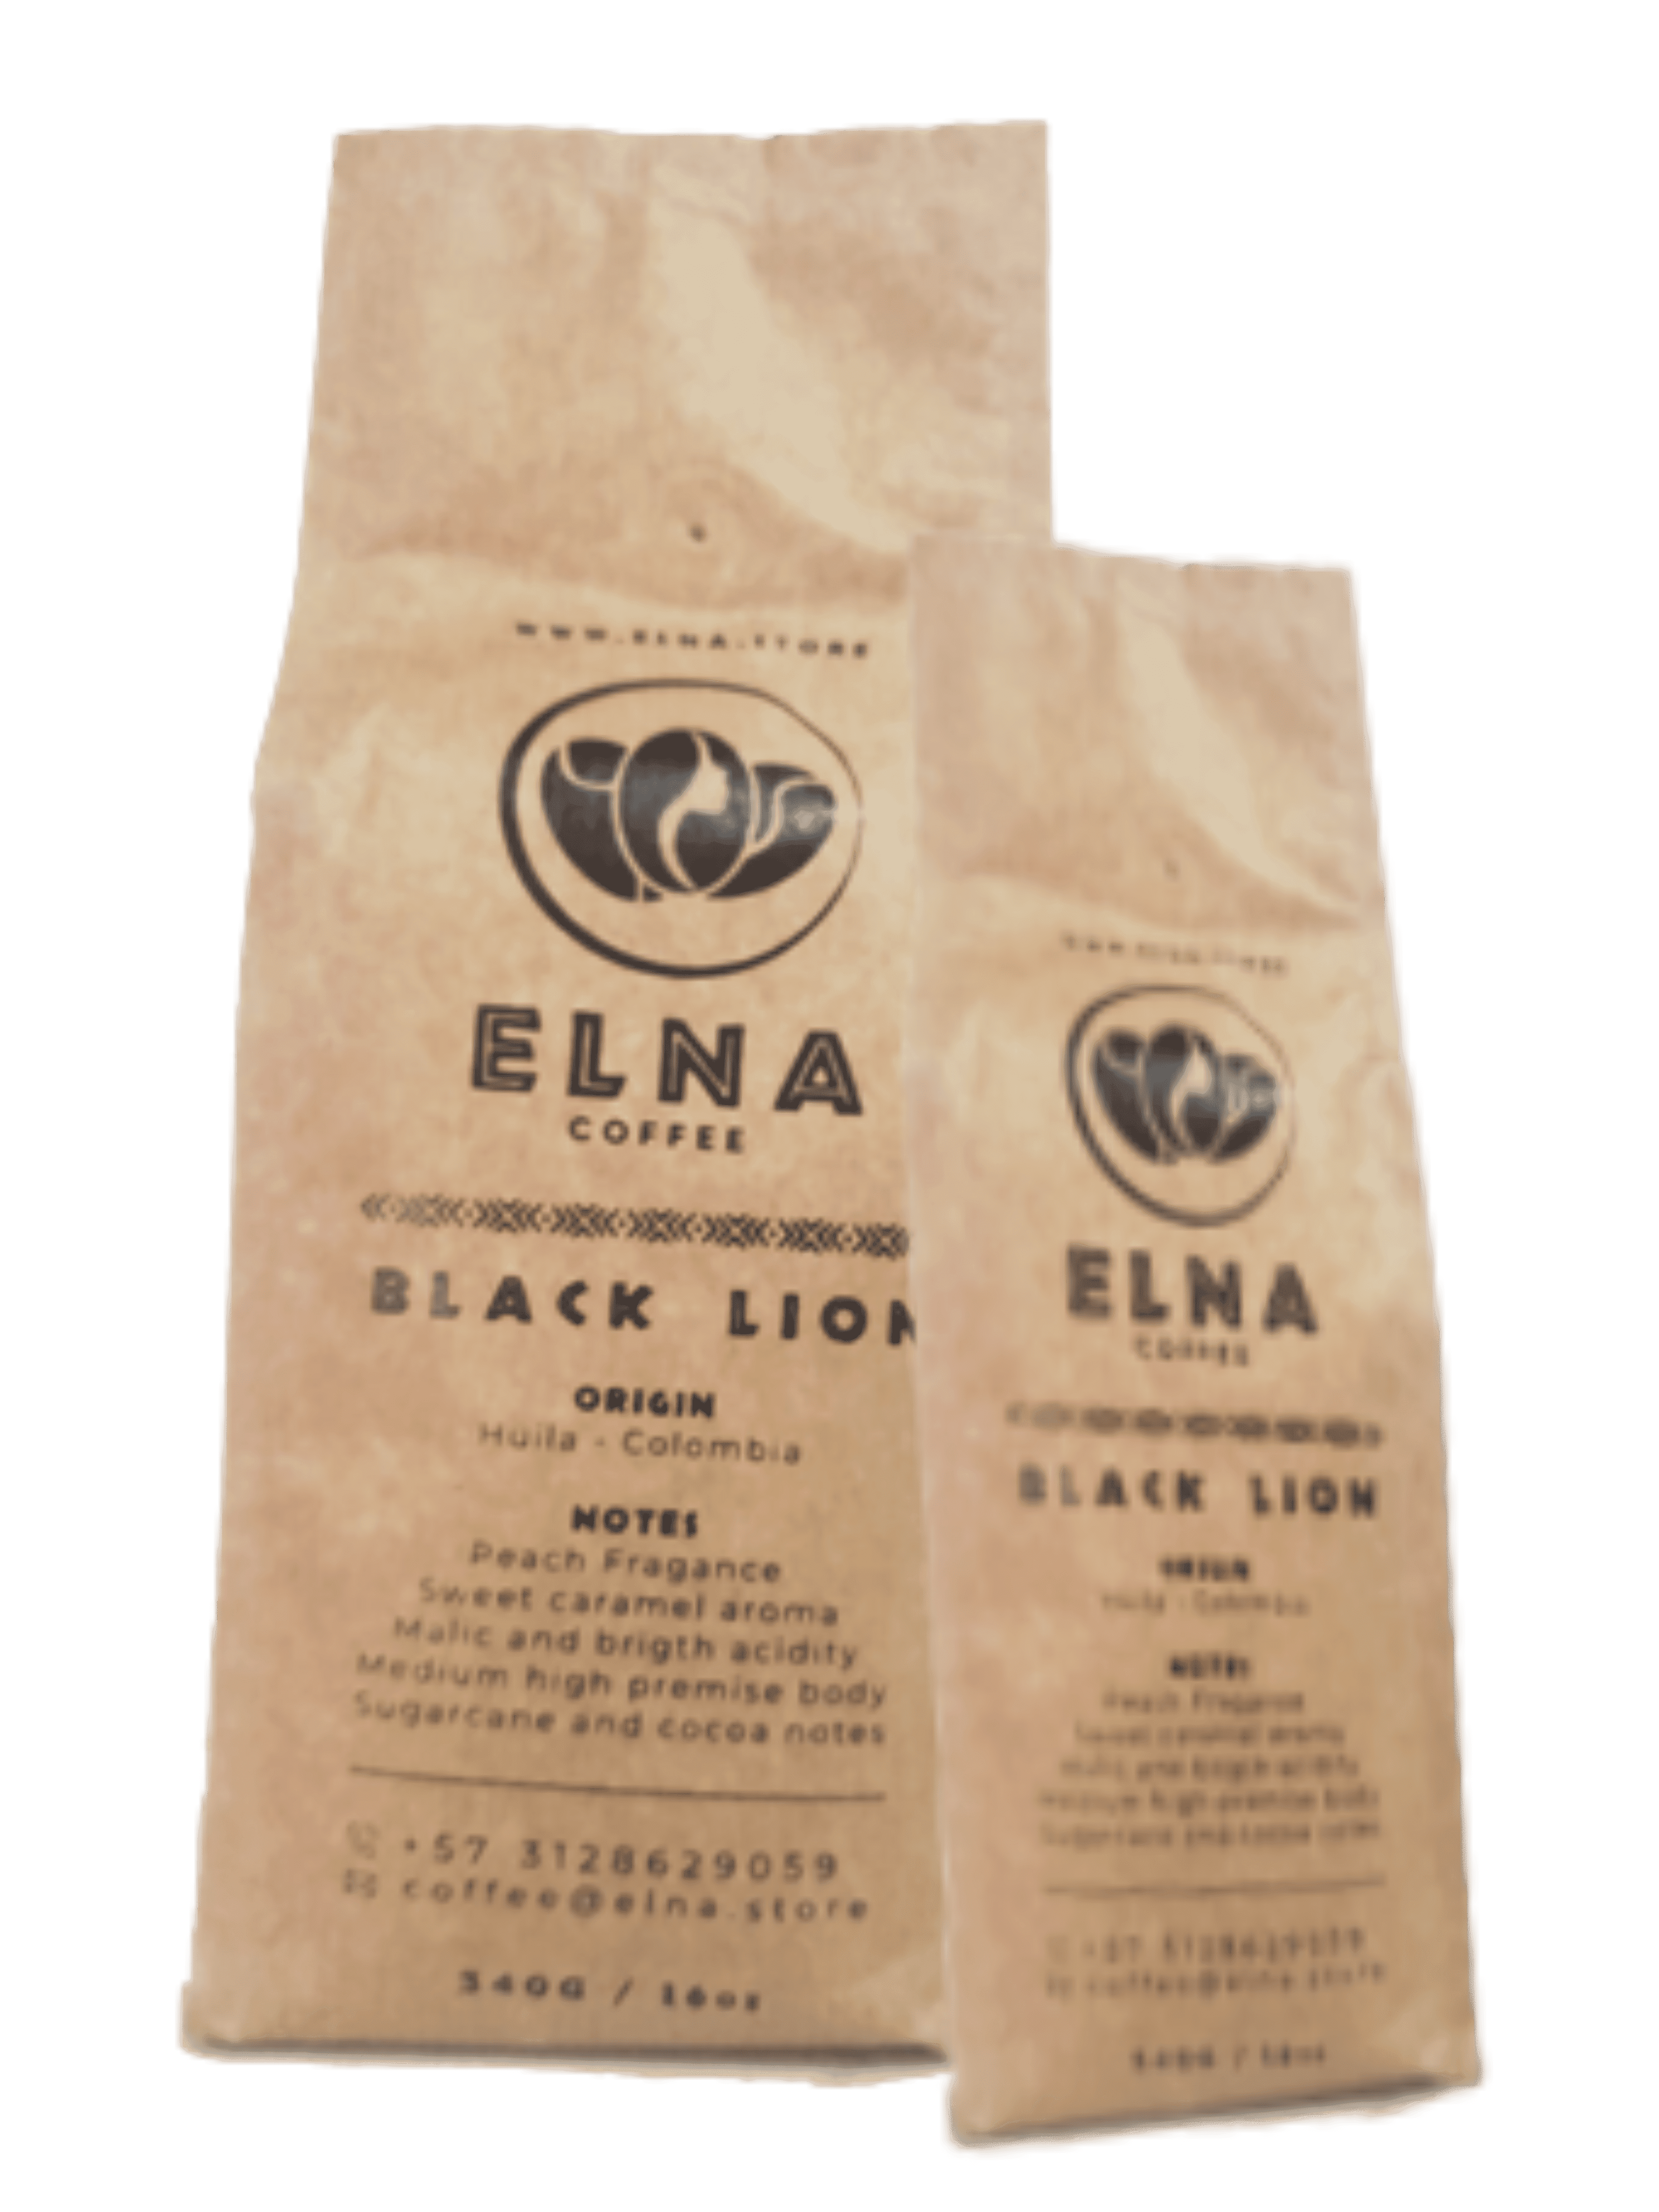 Assorted coffee bean varieties offered by Elna.store.